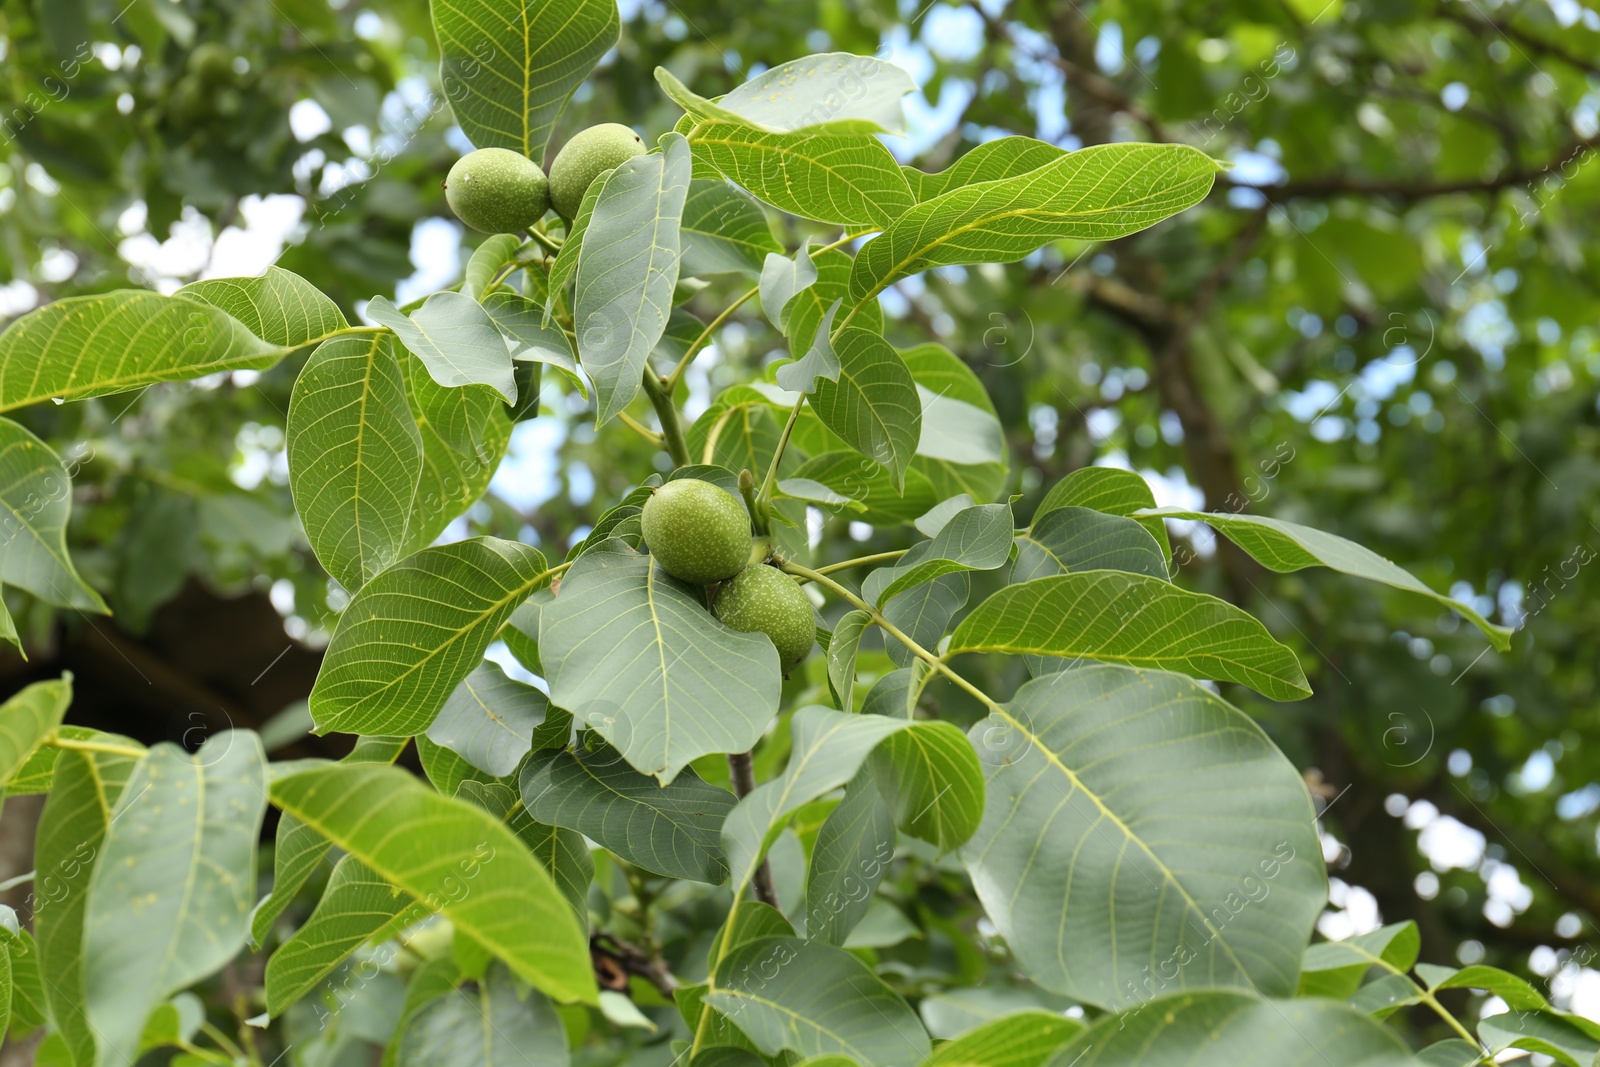 Photo of Green unripe walnuts on tree branch outdoors, bottom view